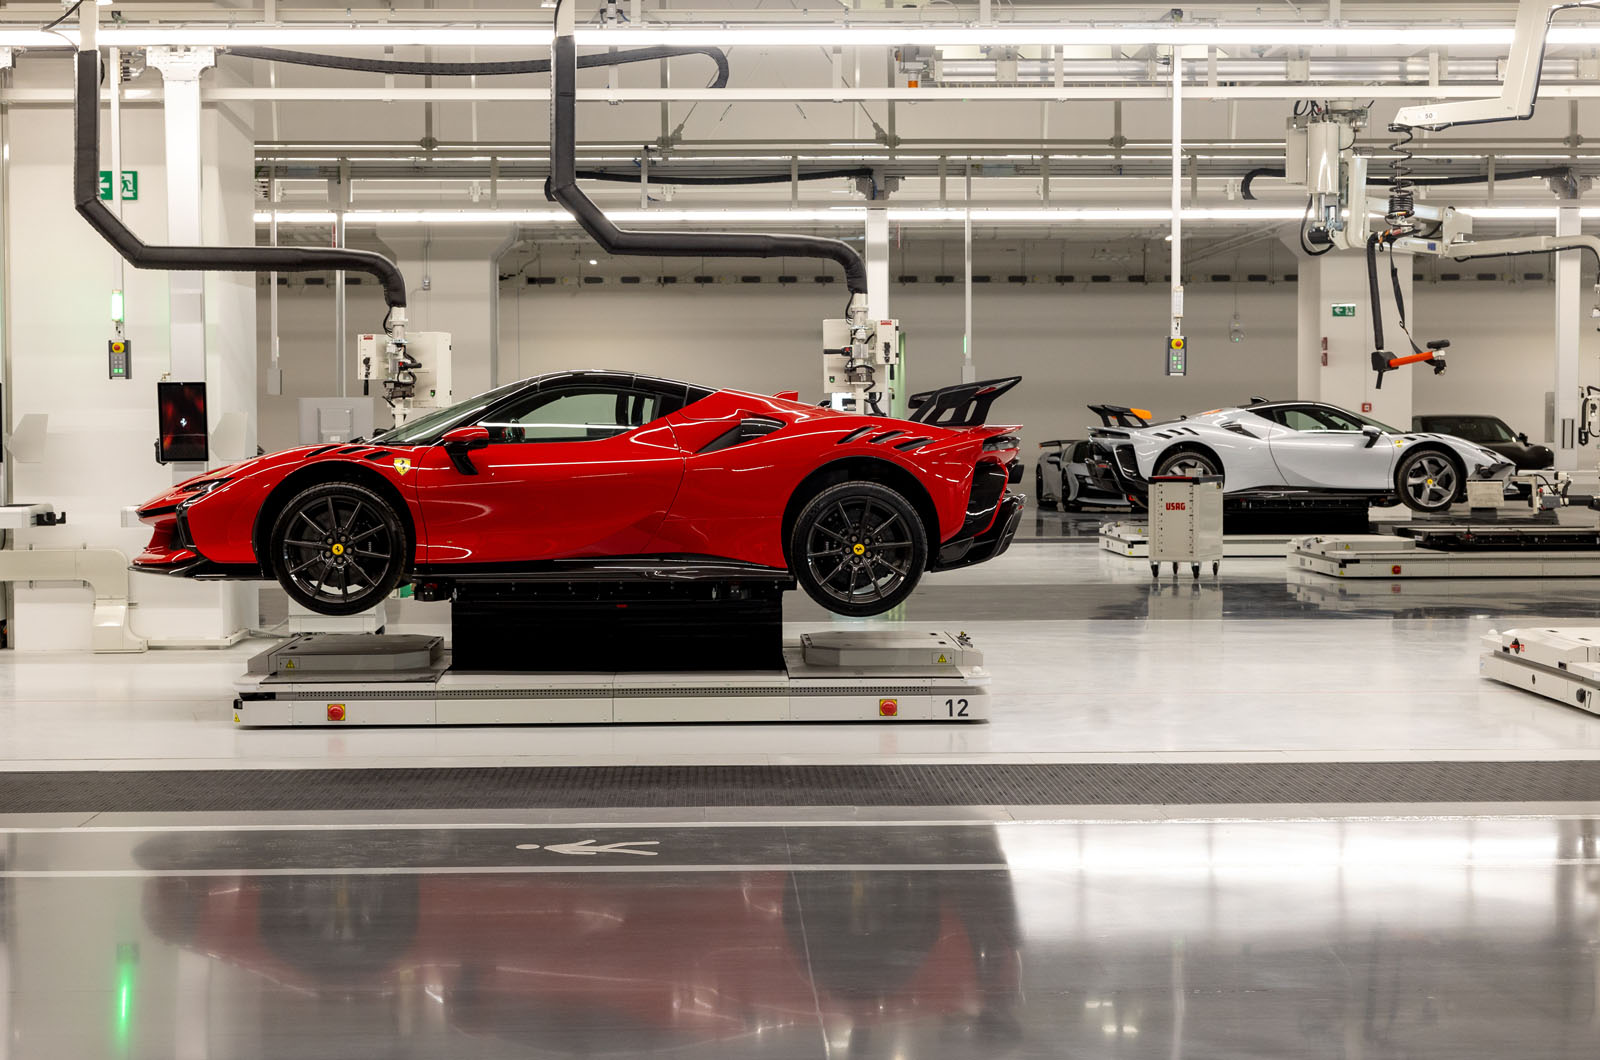 Ferrari gears up for first EV with opening of new E-building